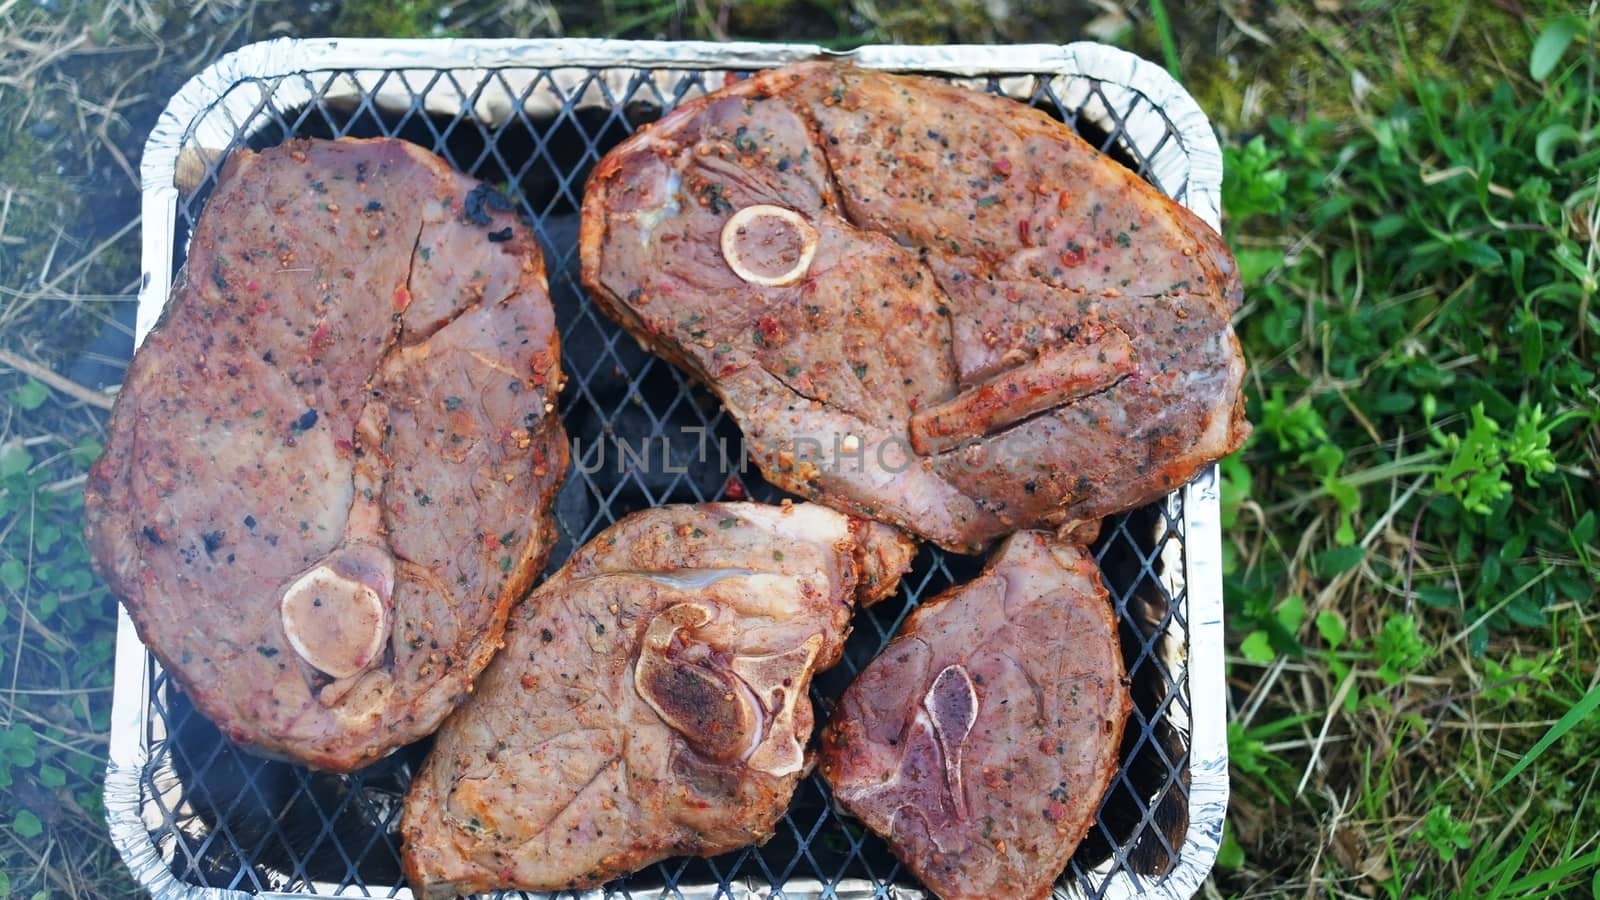 Lamb steaks cooking on disposable grill, Iceland